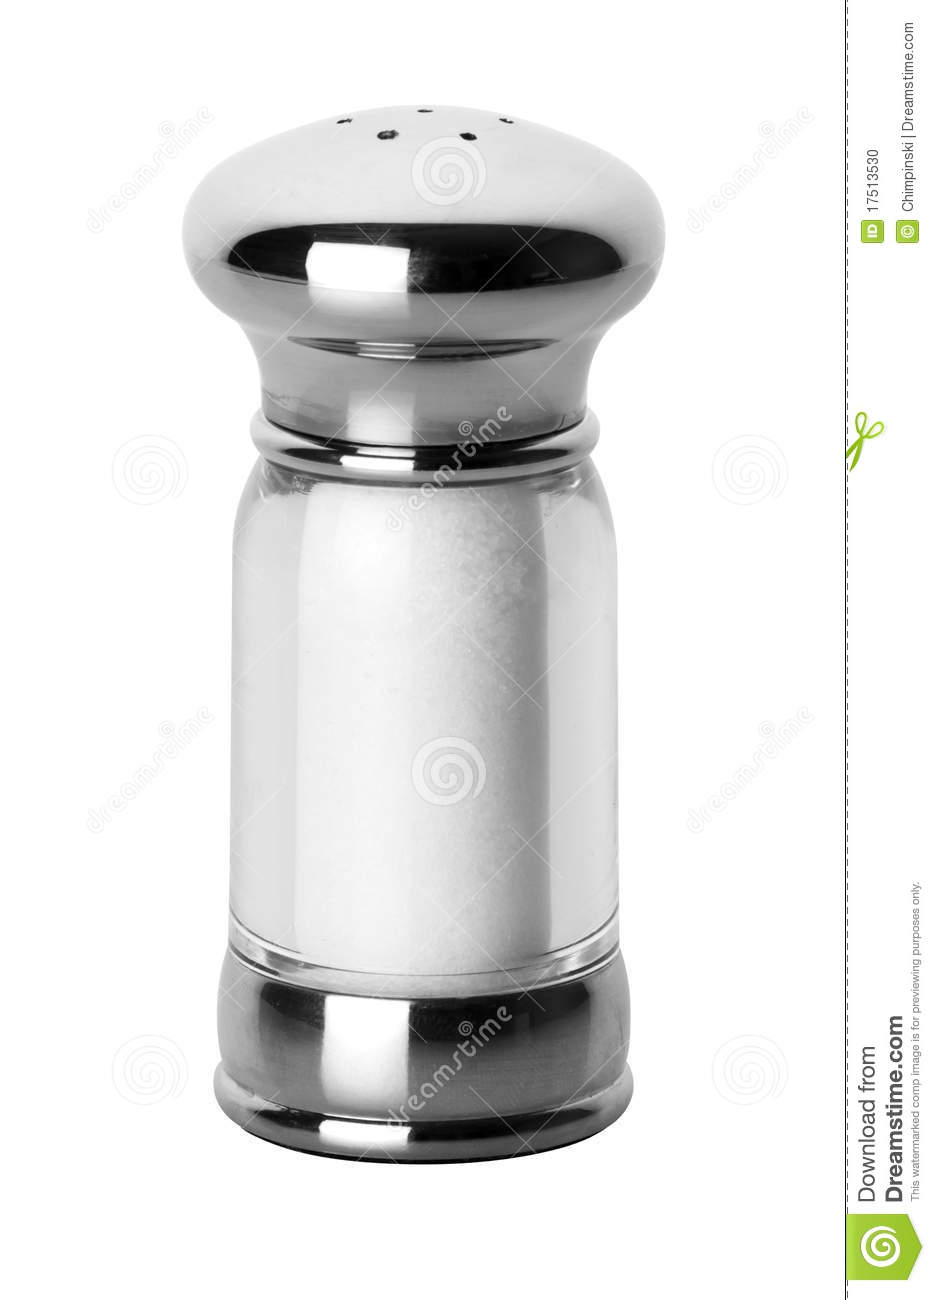 Salt Shaker Isolated On White With A Clipping Path Mr No Pr No 4